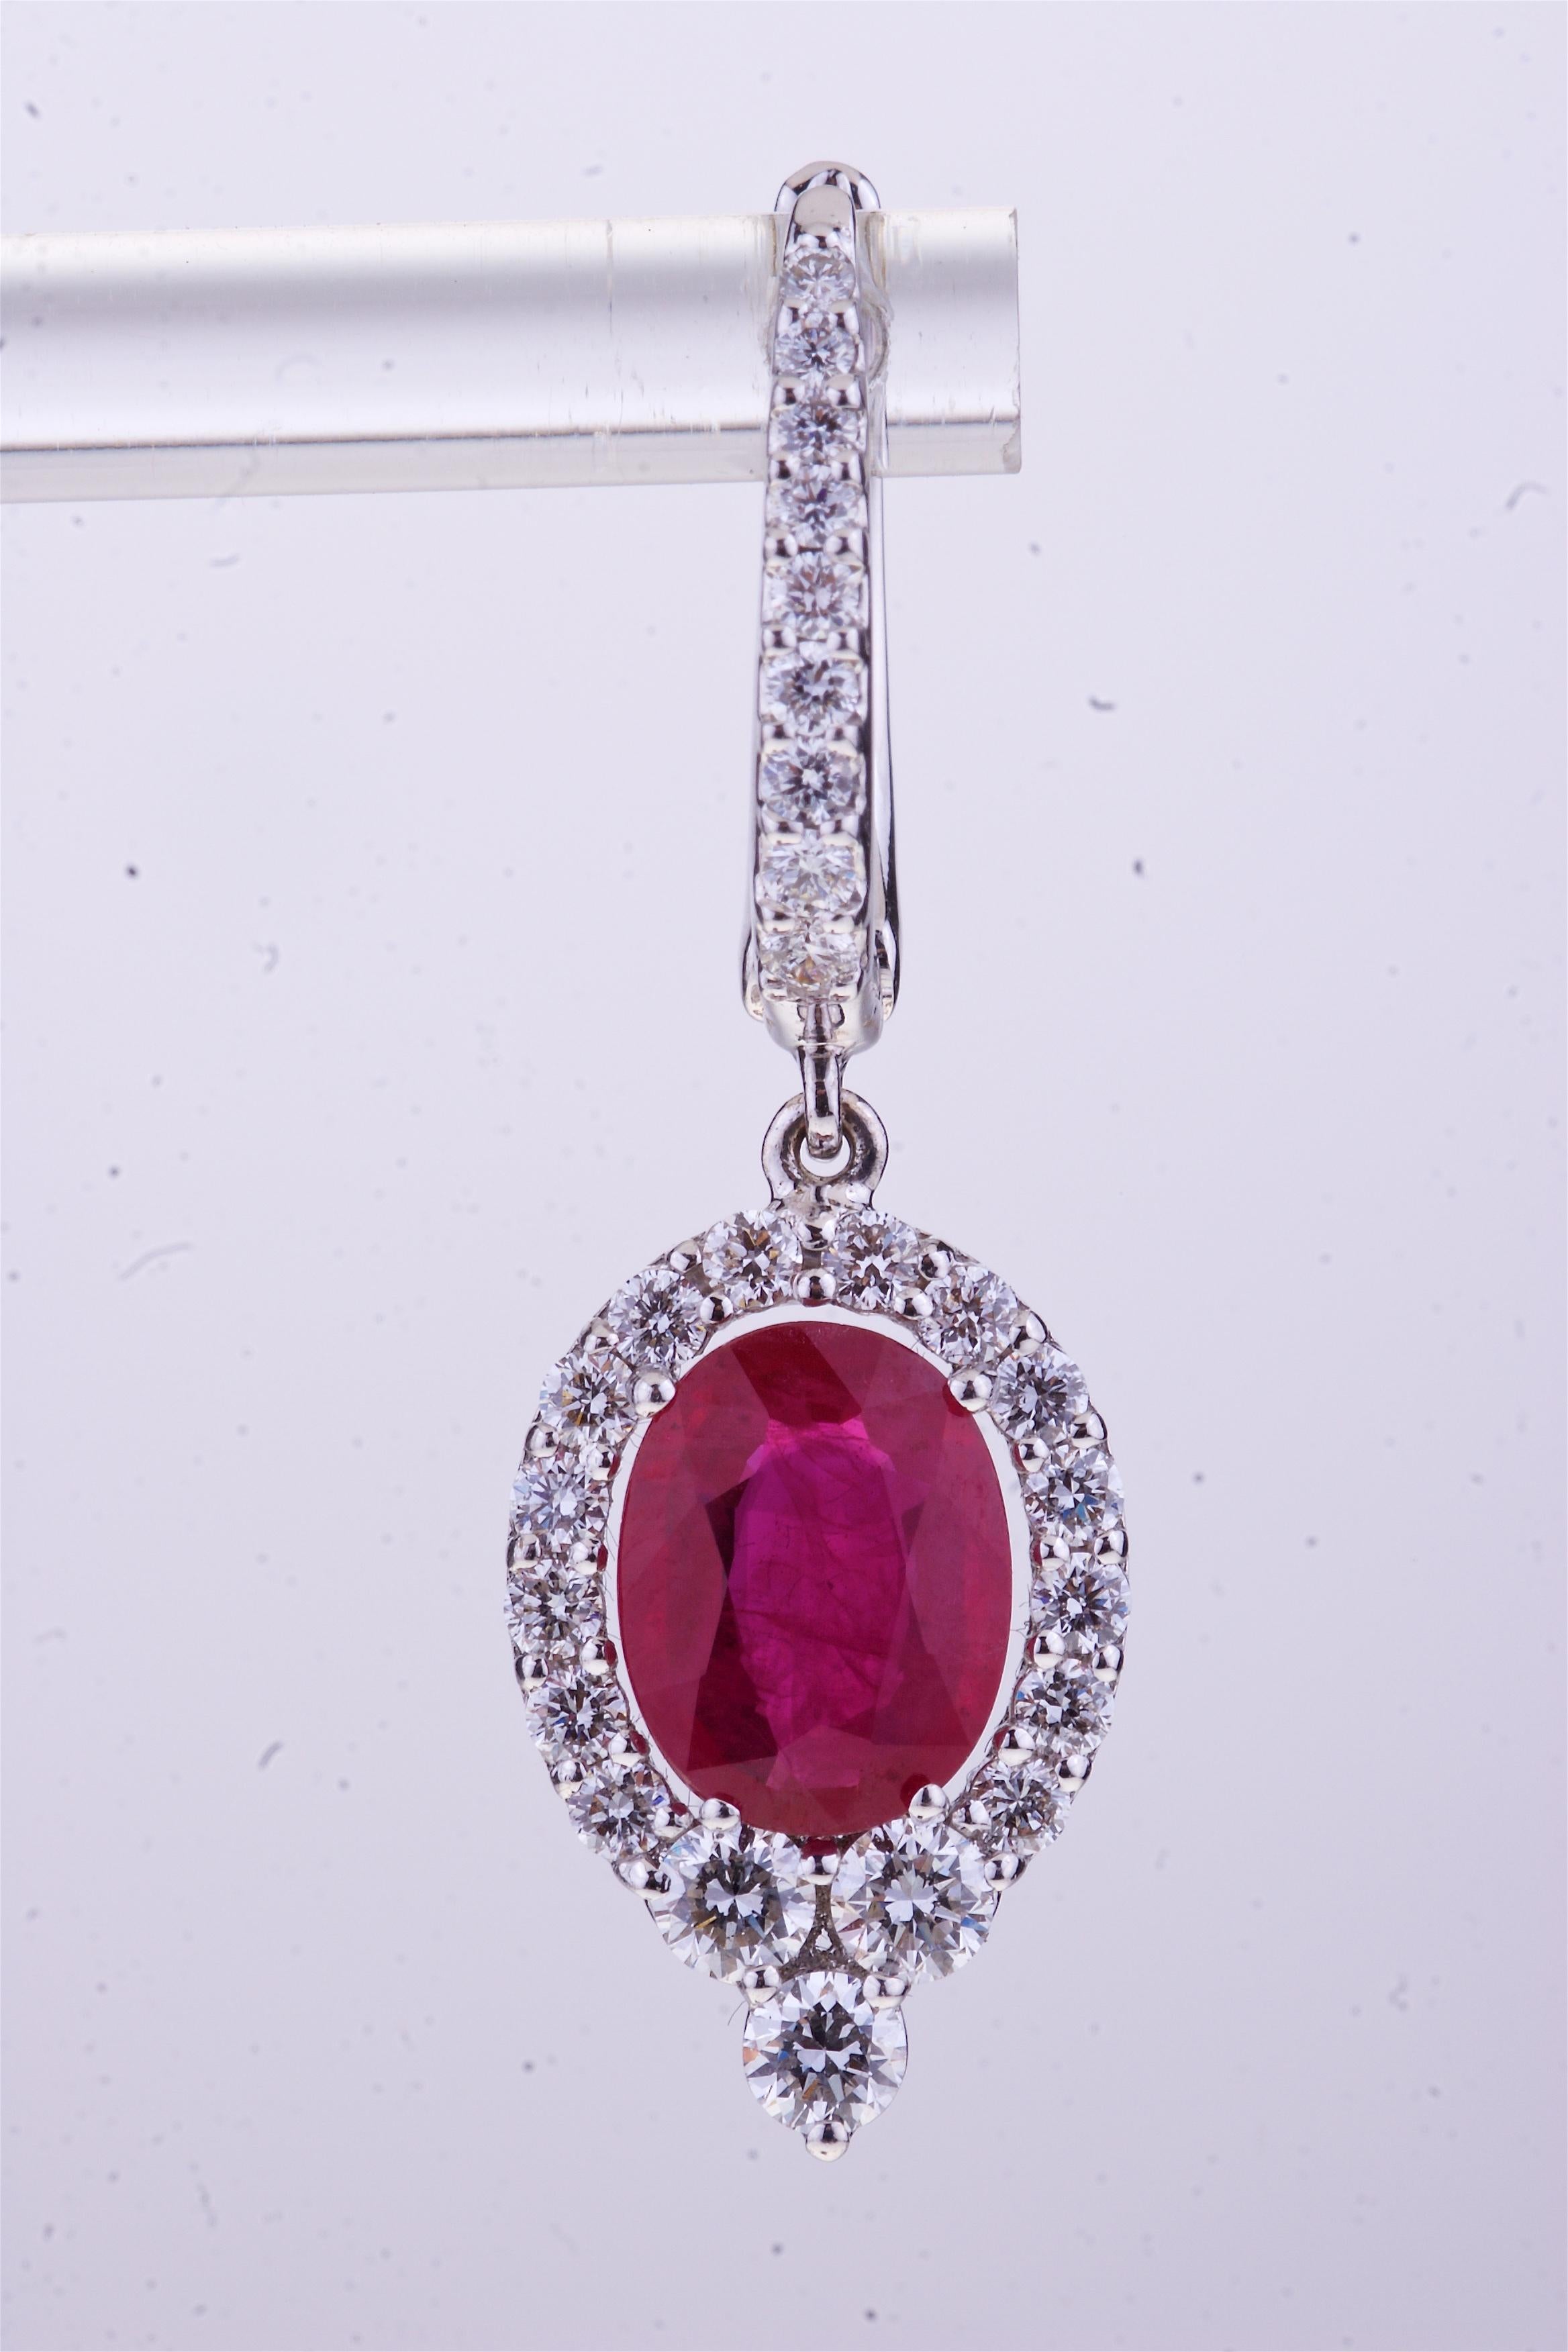 Oval Ruby with Round Diamonds White Gold Pendant Earrings.
Excellent Pair of Oval Ruby (ct. 2.52) and diamonds (ct. 1.02) for Elegant White Gold Pendant Earrings.
18kt gold weight is grams 5.40.
Designed and Manufactured in Italy. 
Angeletti Boasts